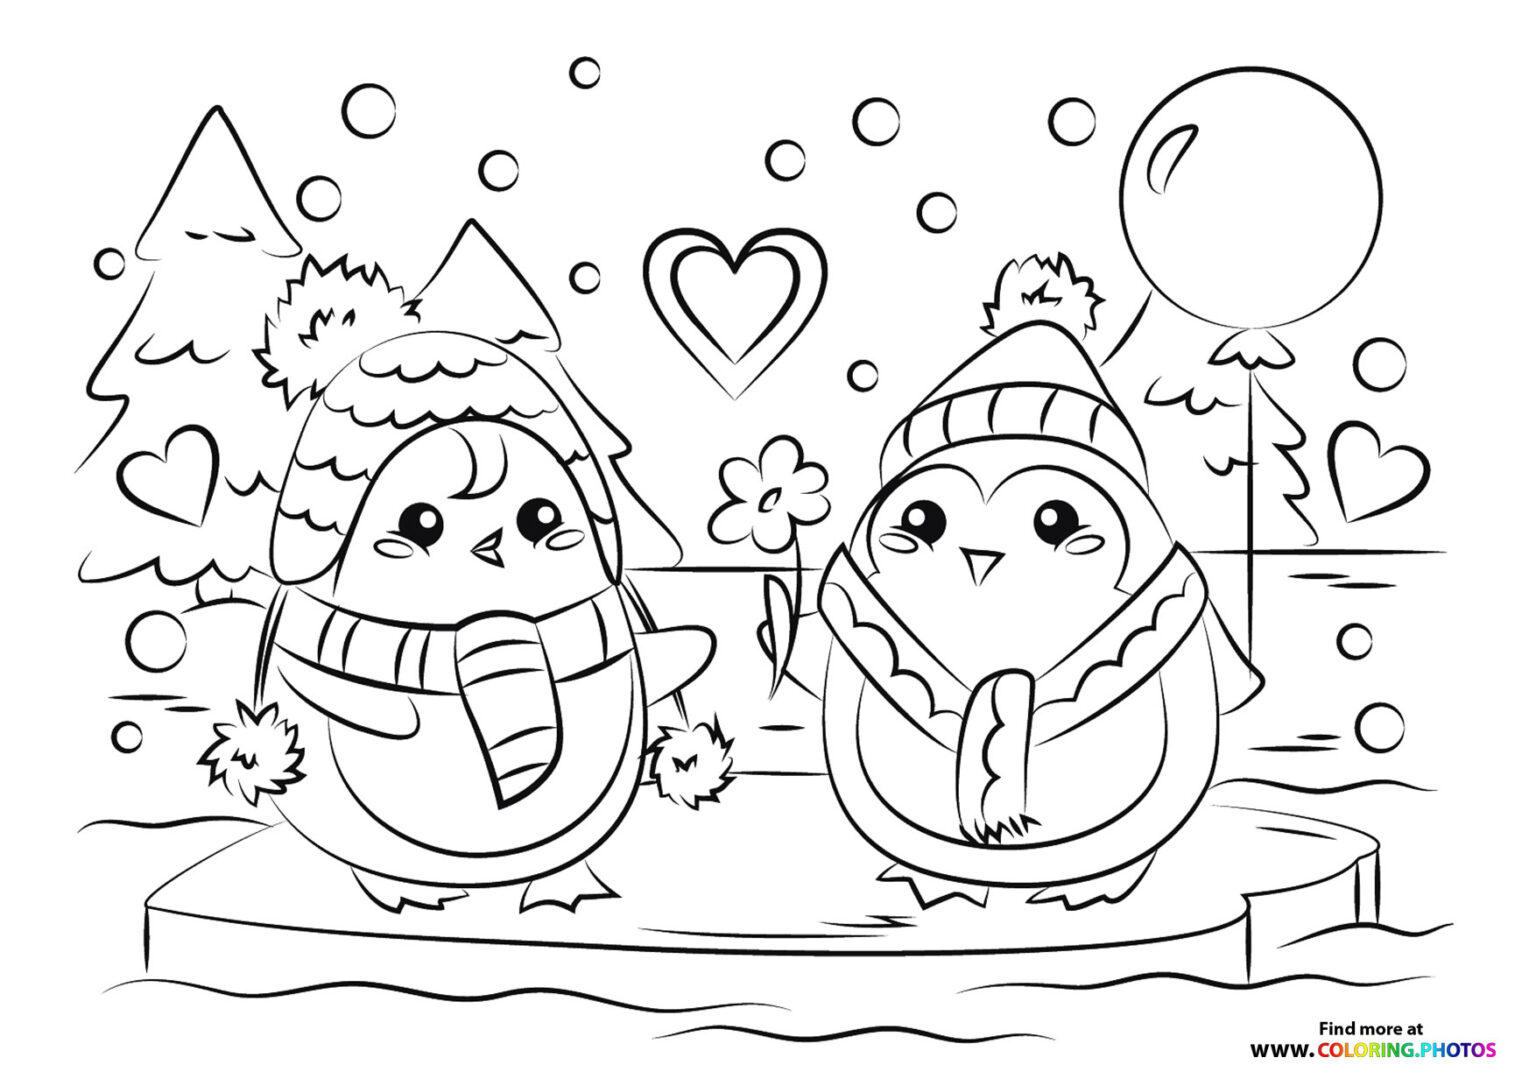 Winter - Coloring Pages for kids | Free and easy print or download